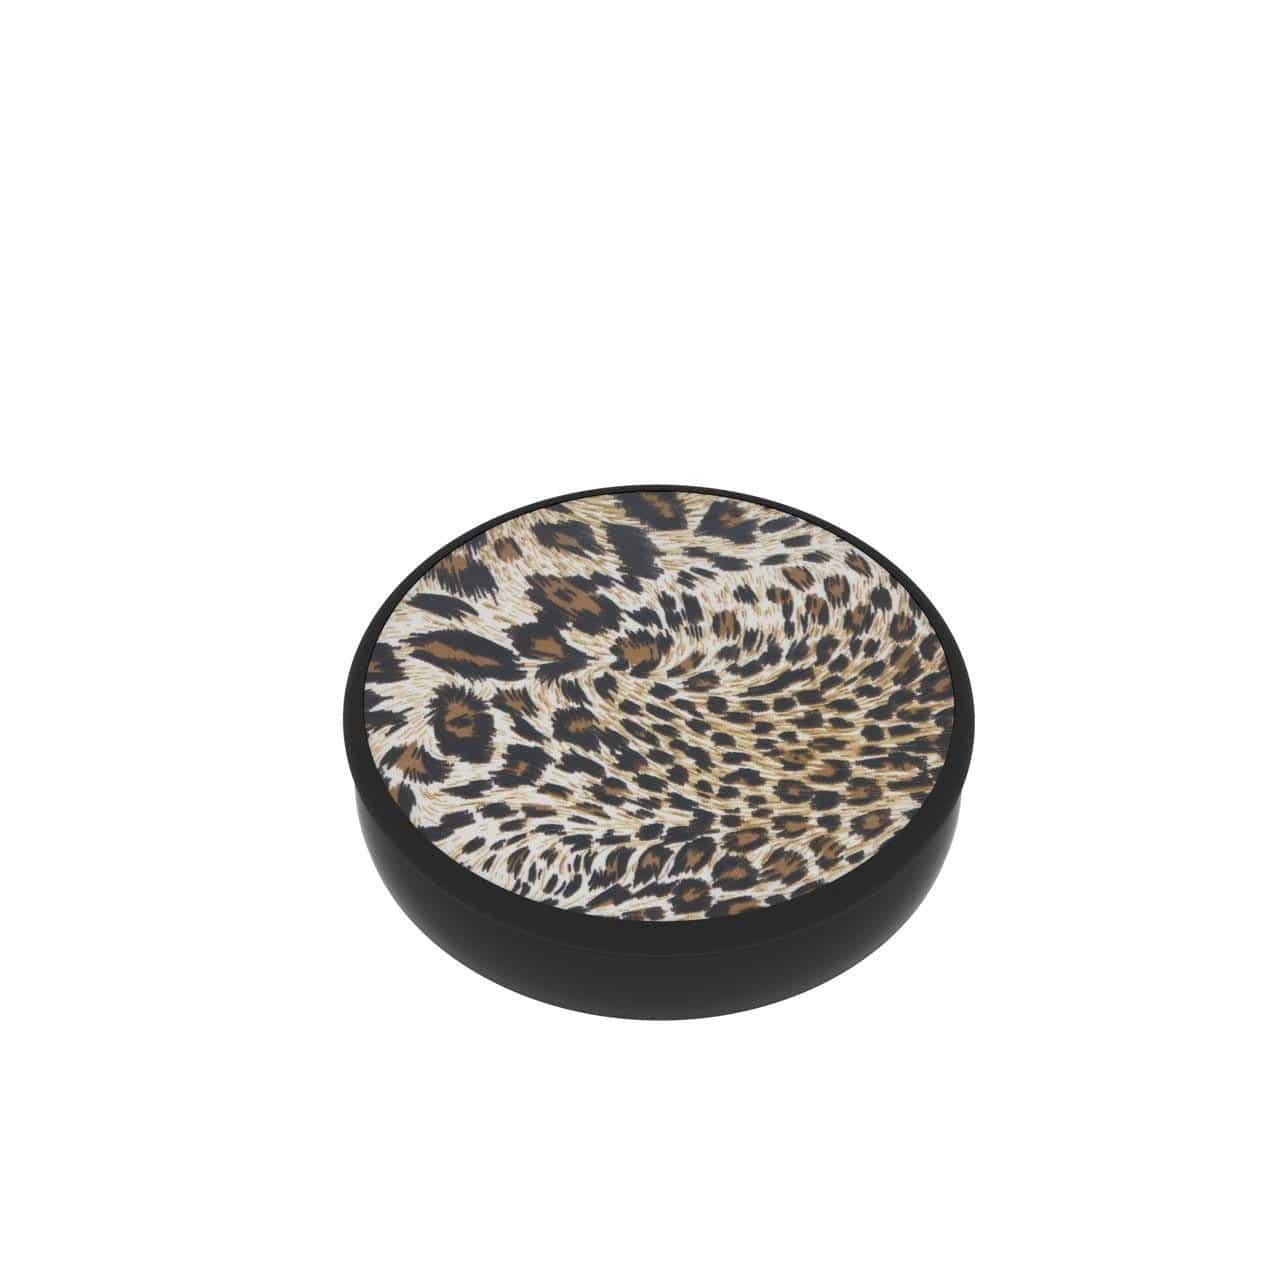 Magnetic Phone Grip and Stand with built in magnets (Cheetah)